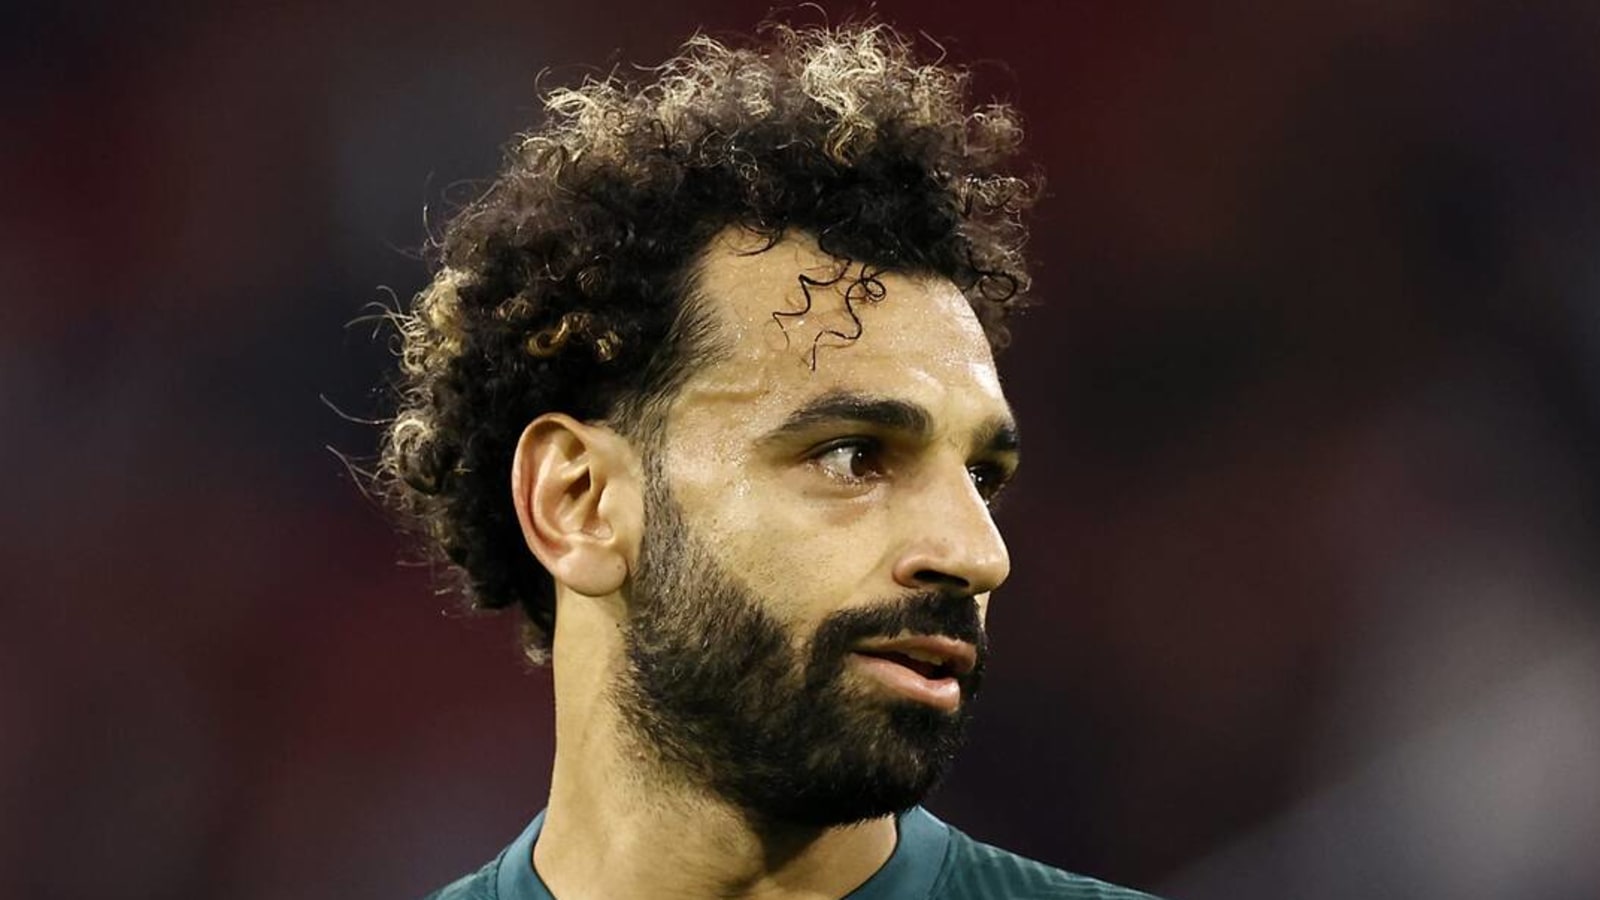 Ben Jacobs shares the current ‘feeling’ around Mo Salah’s future at Liverpool